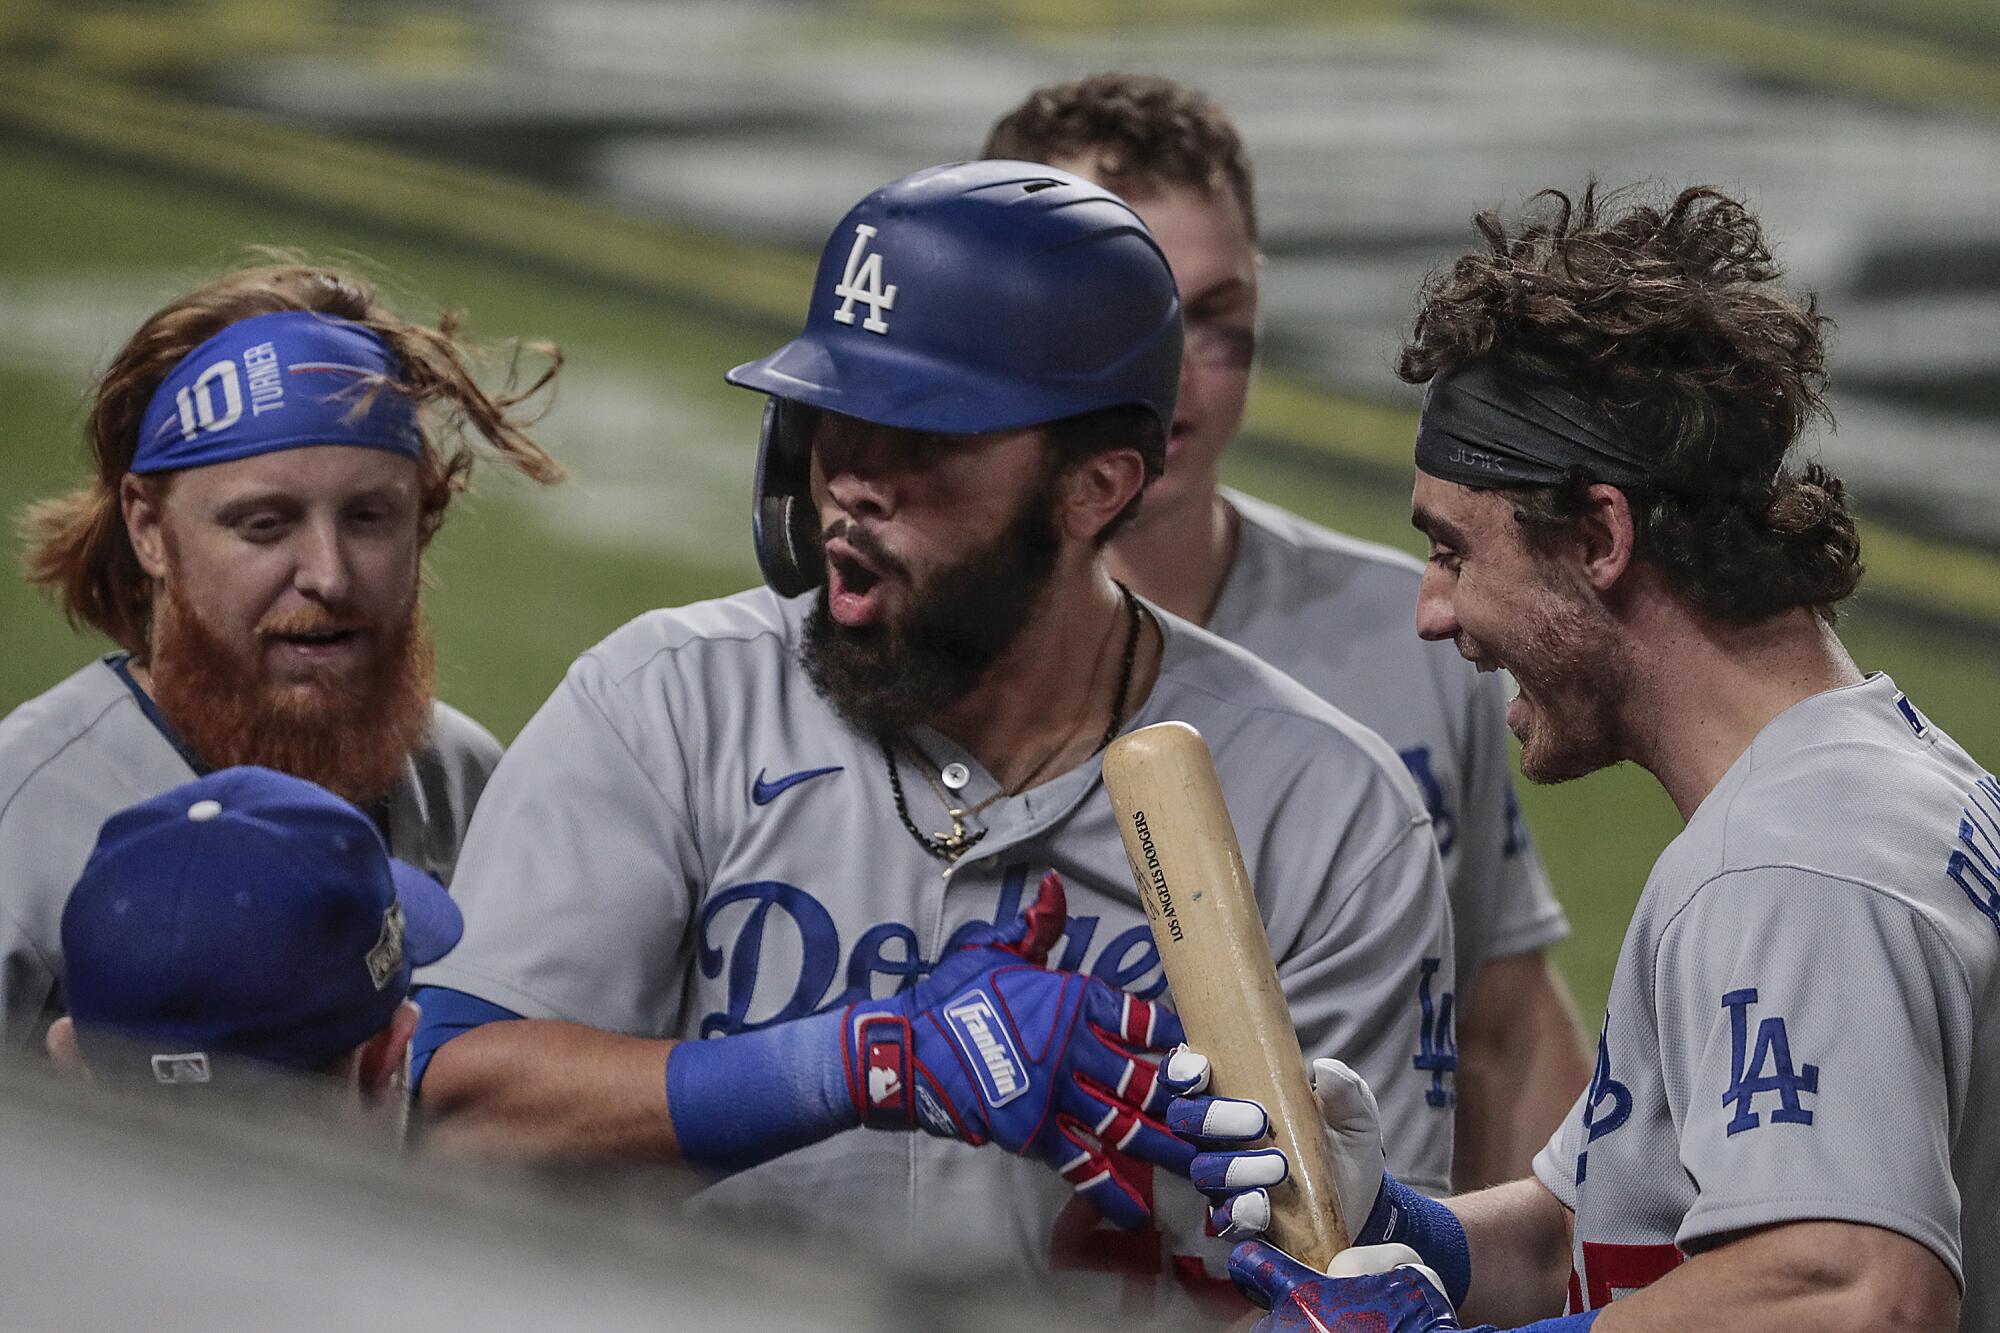 Edwin Ríos celebrates with his Dodgers teammates after hitting a solo home run in Game 4 of the NLCS.